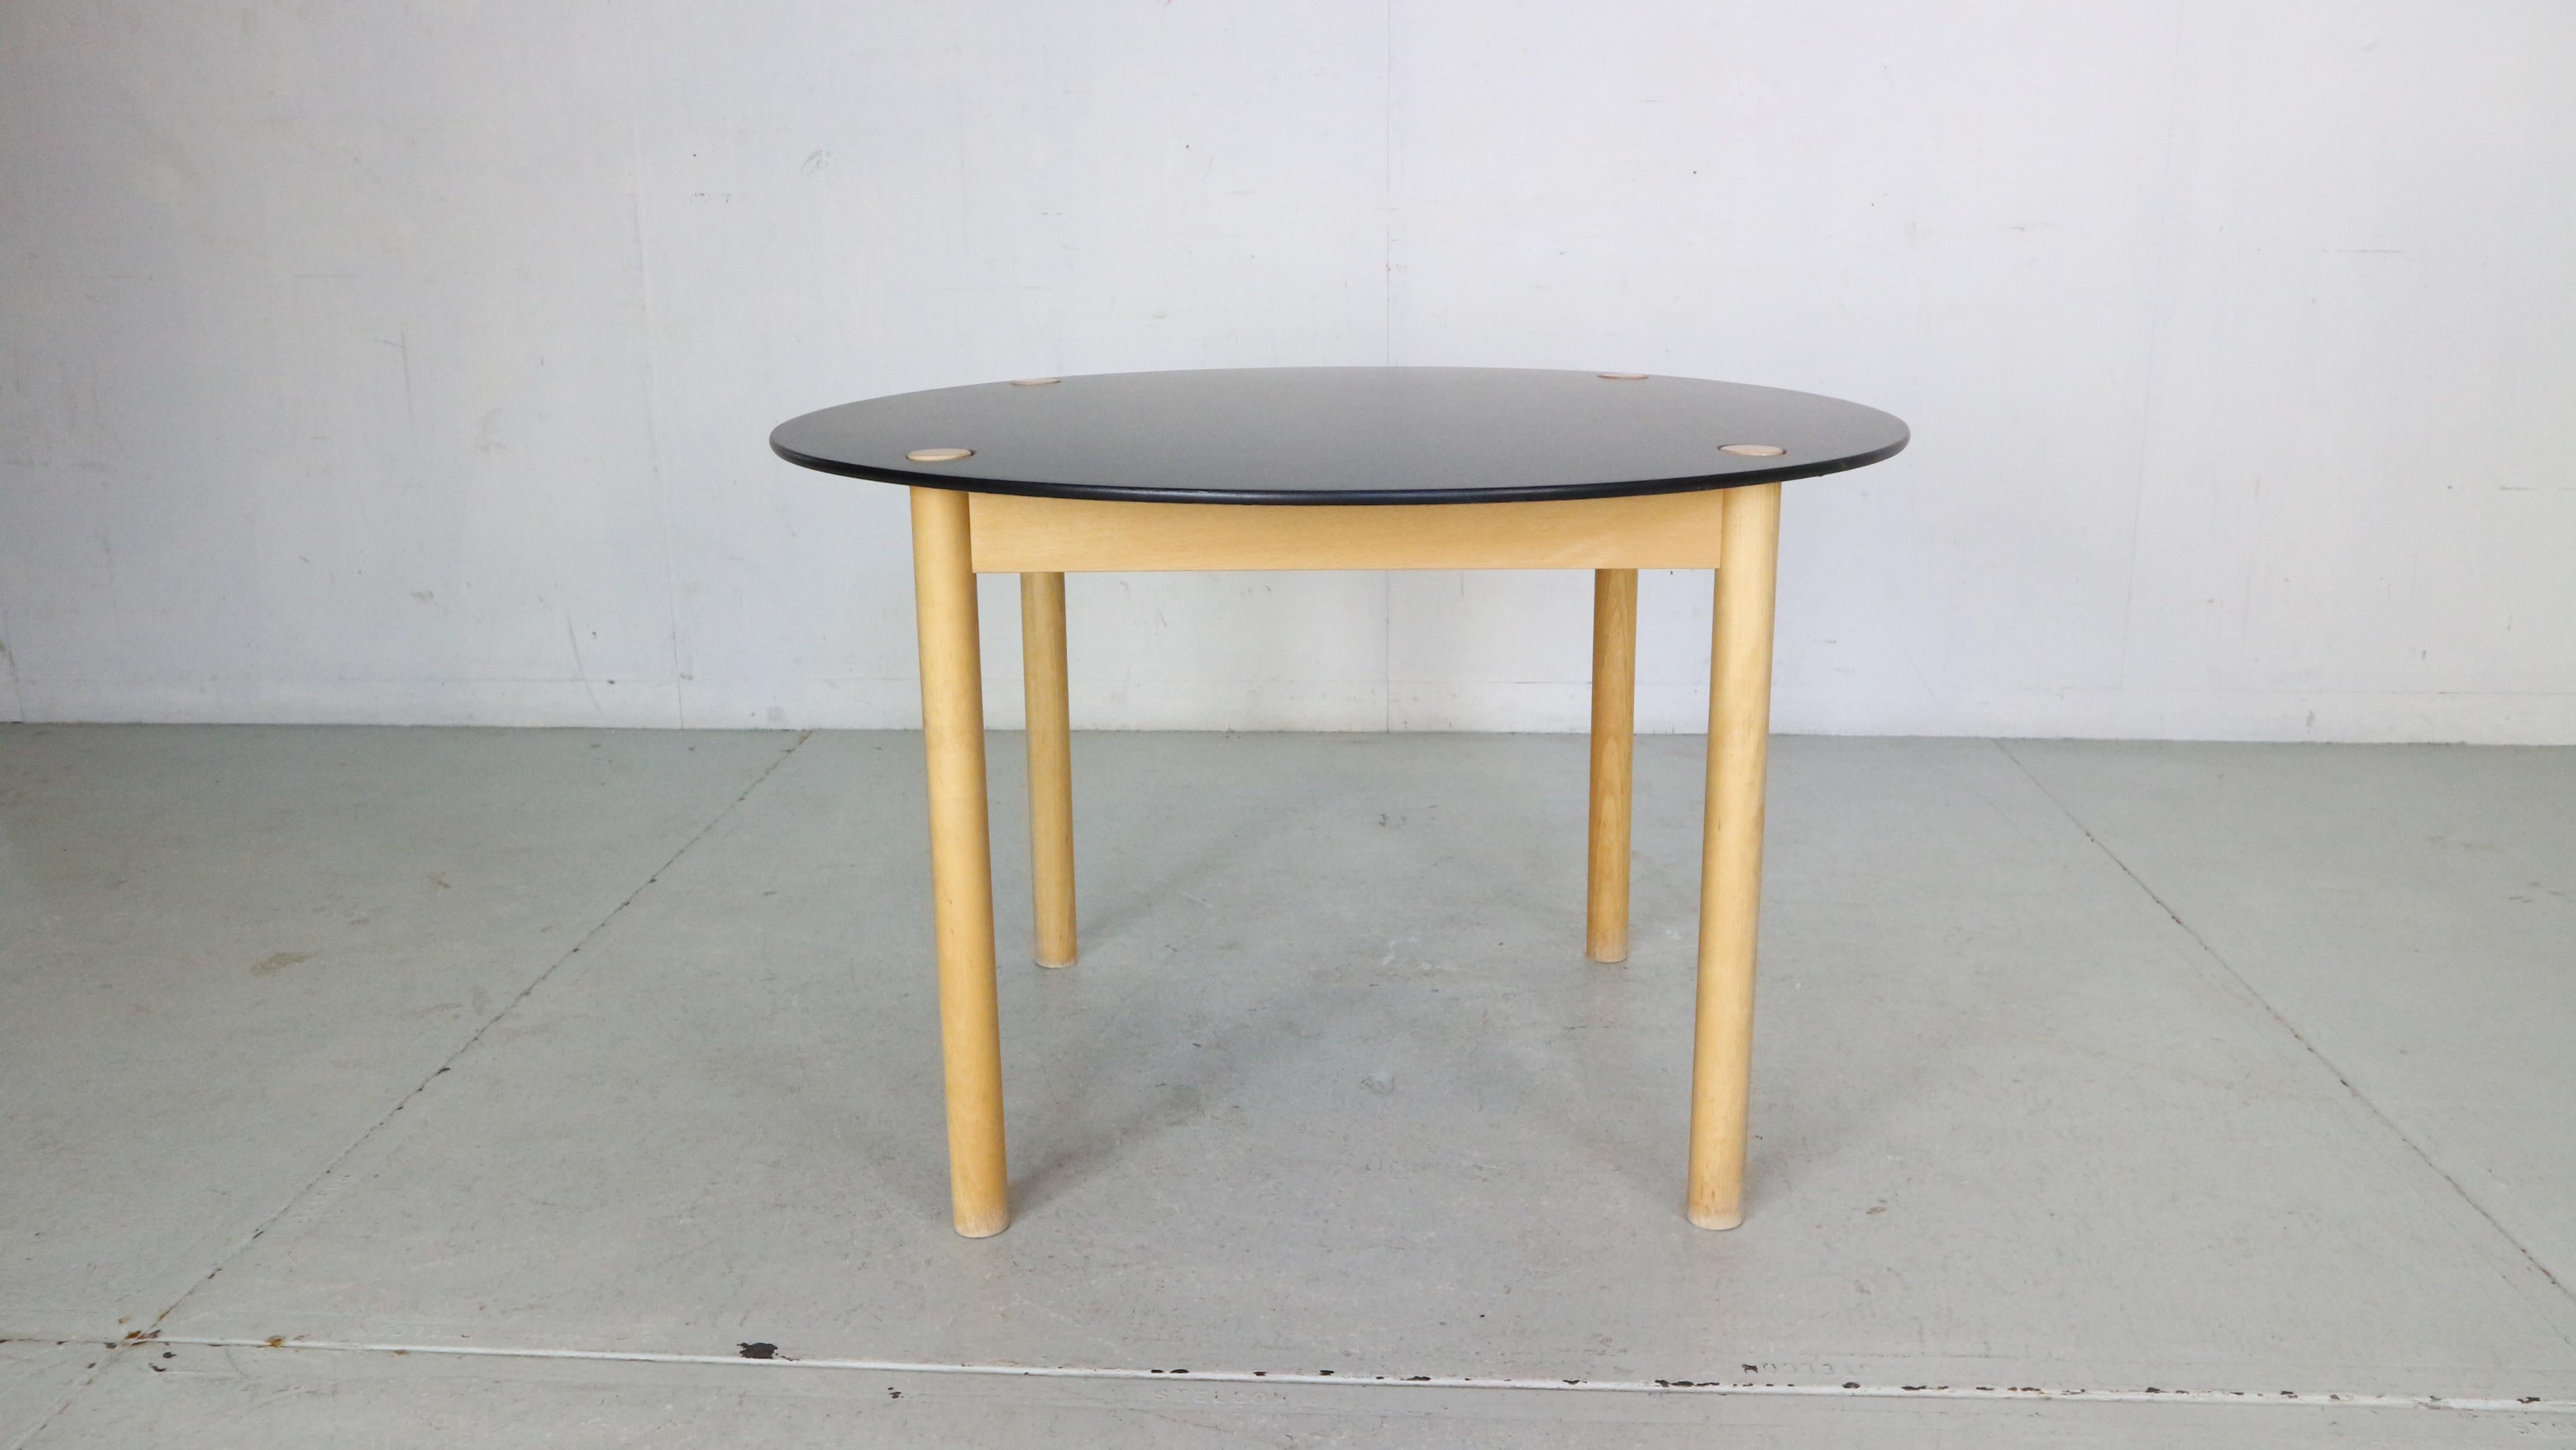 Mid-Century Modern period very unique flip-top round dinning table designed by famous Danish furniture designer Børge Mogensen and manufactured by FDB Møbler in 1950's circa.

The table is made of solid oak wood and the flip-top is finished with